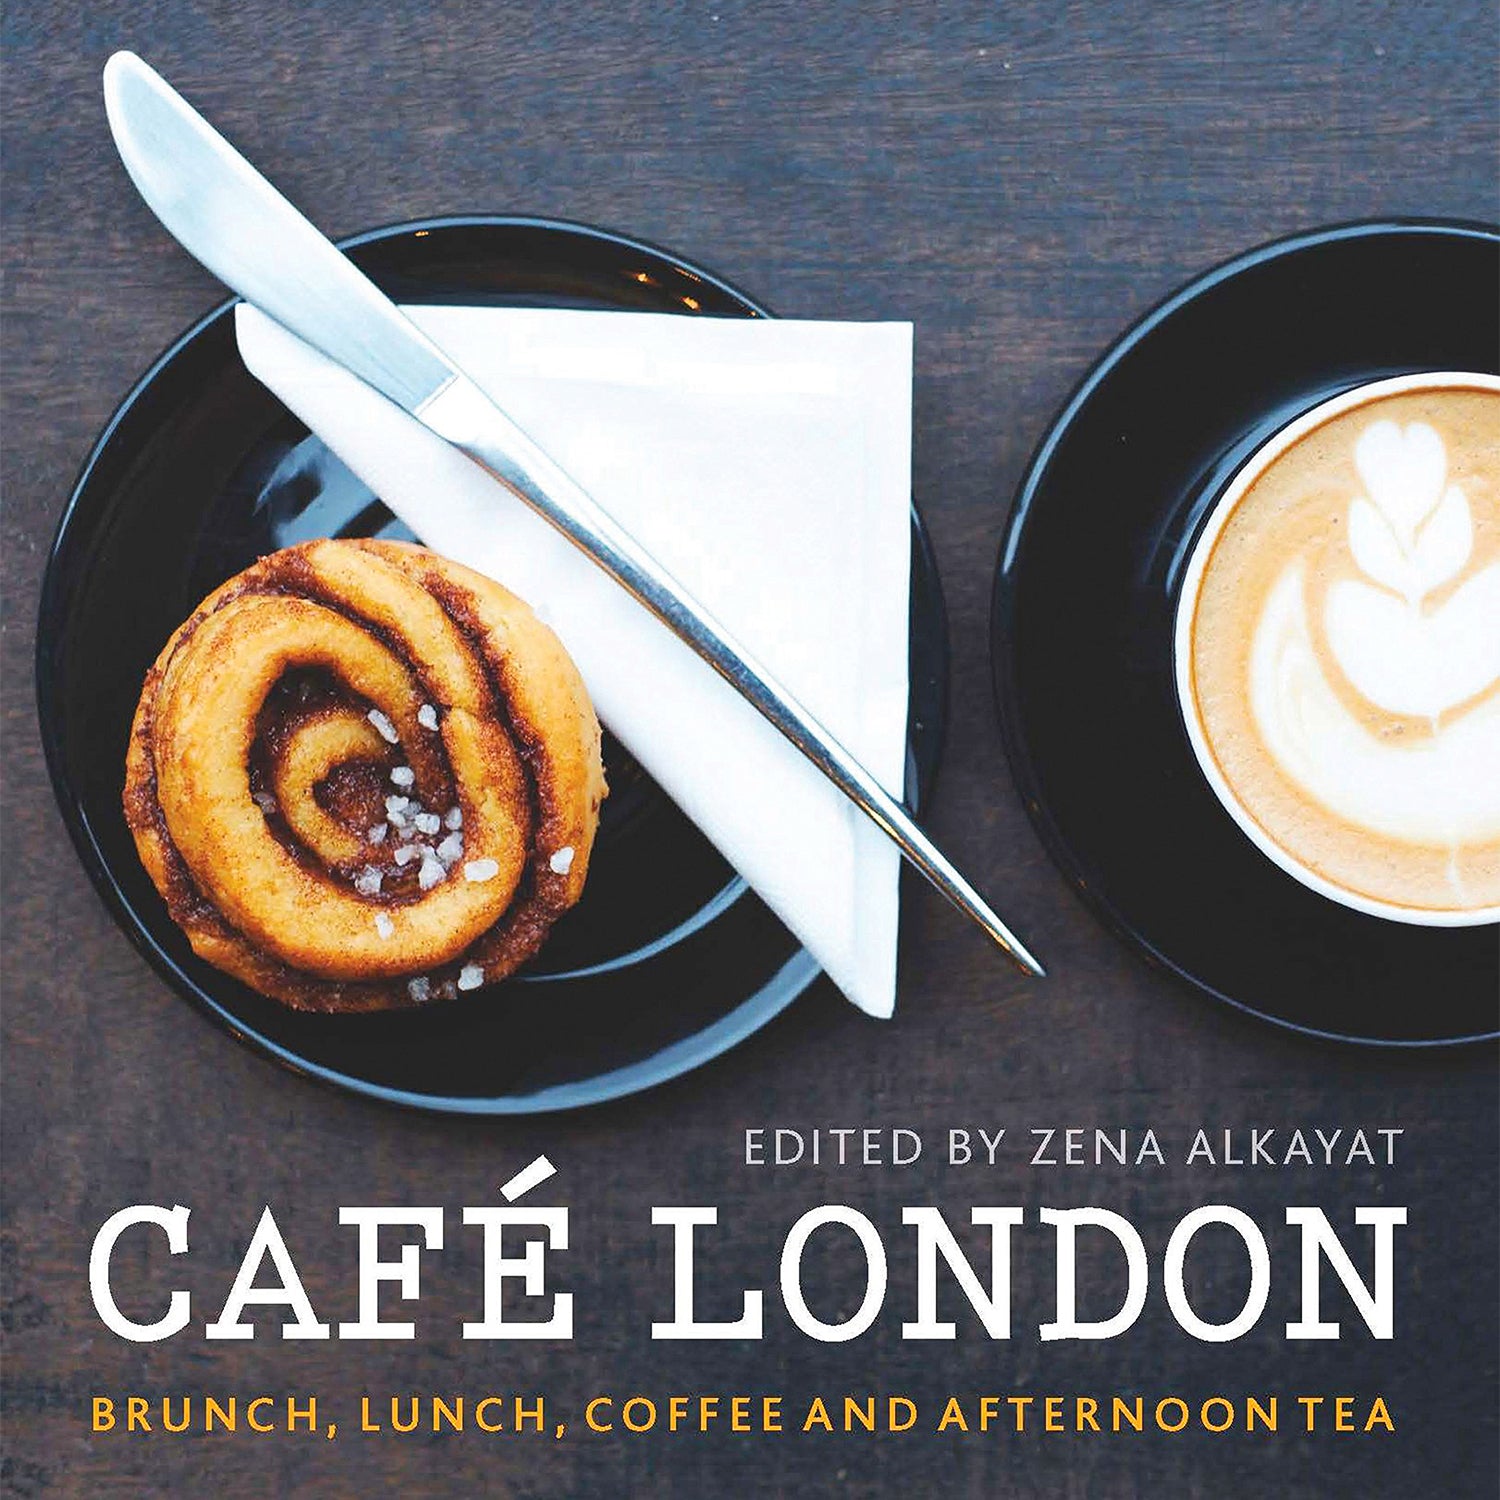 Cafe London Book - Brunch, Lunch, Coffee and Afternoon Tea